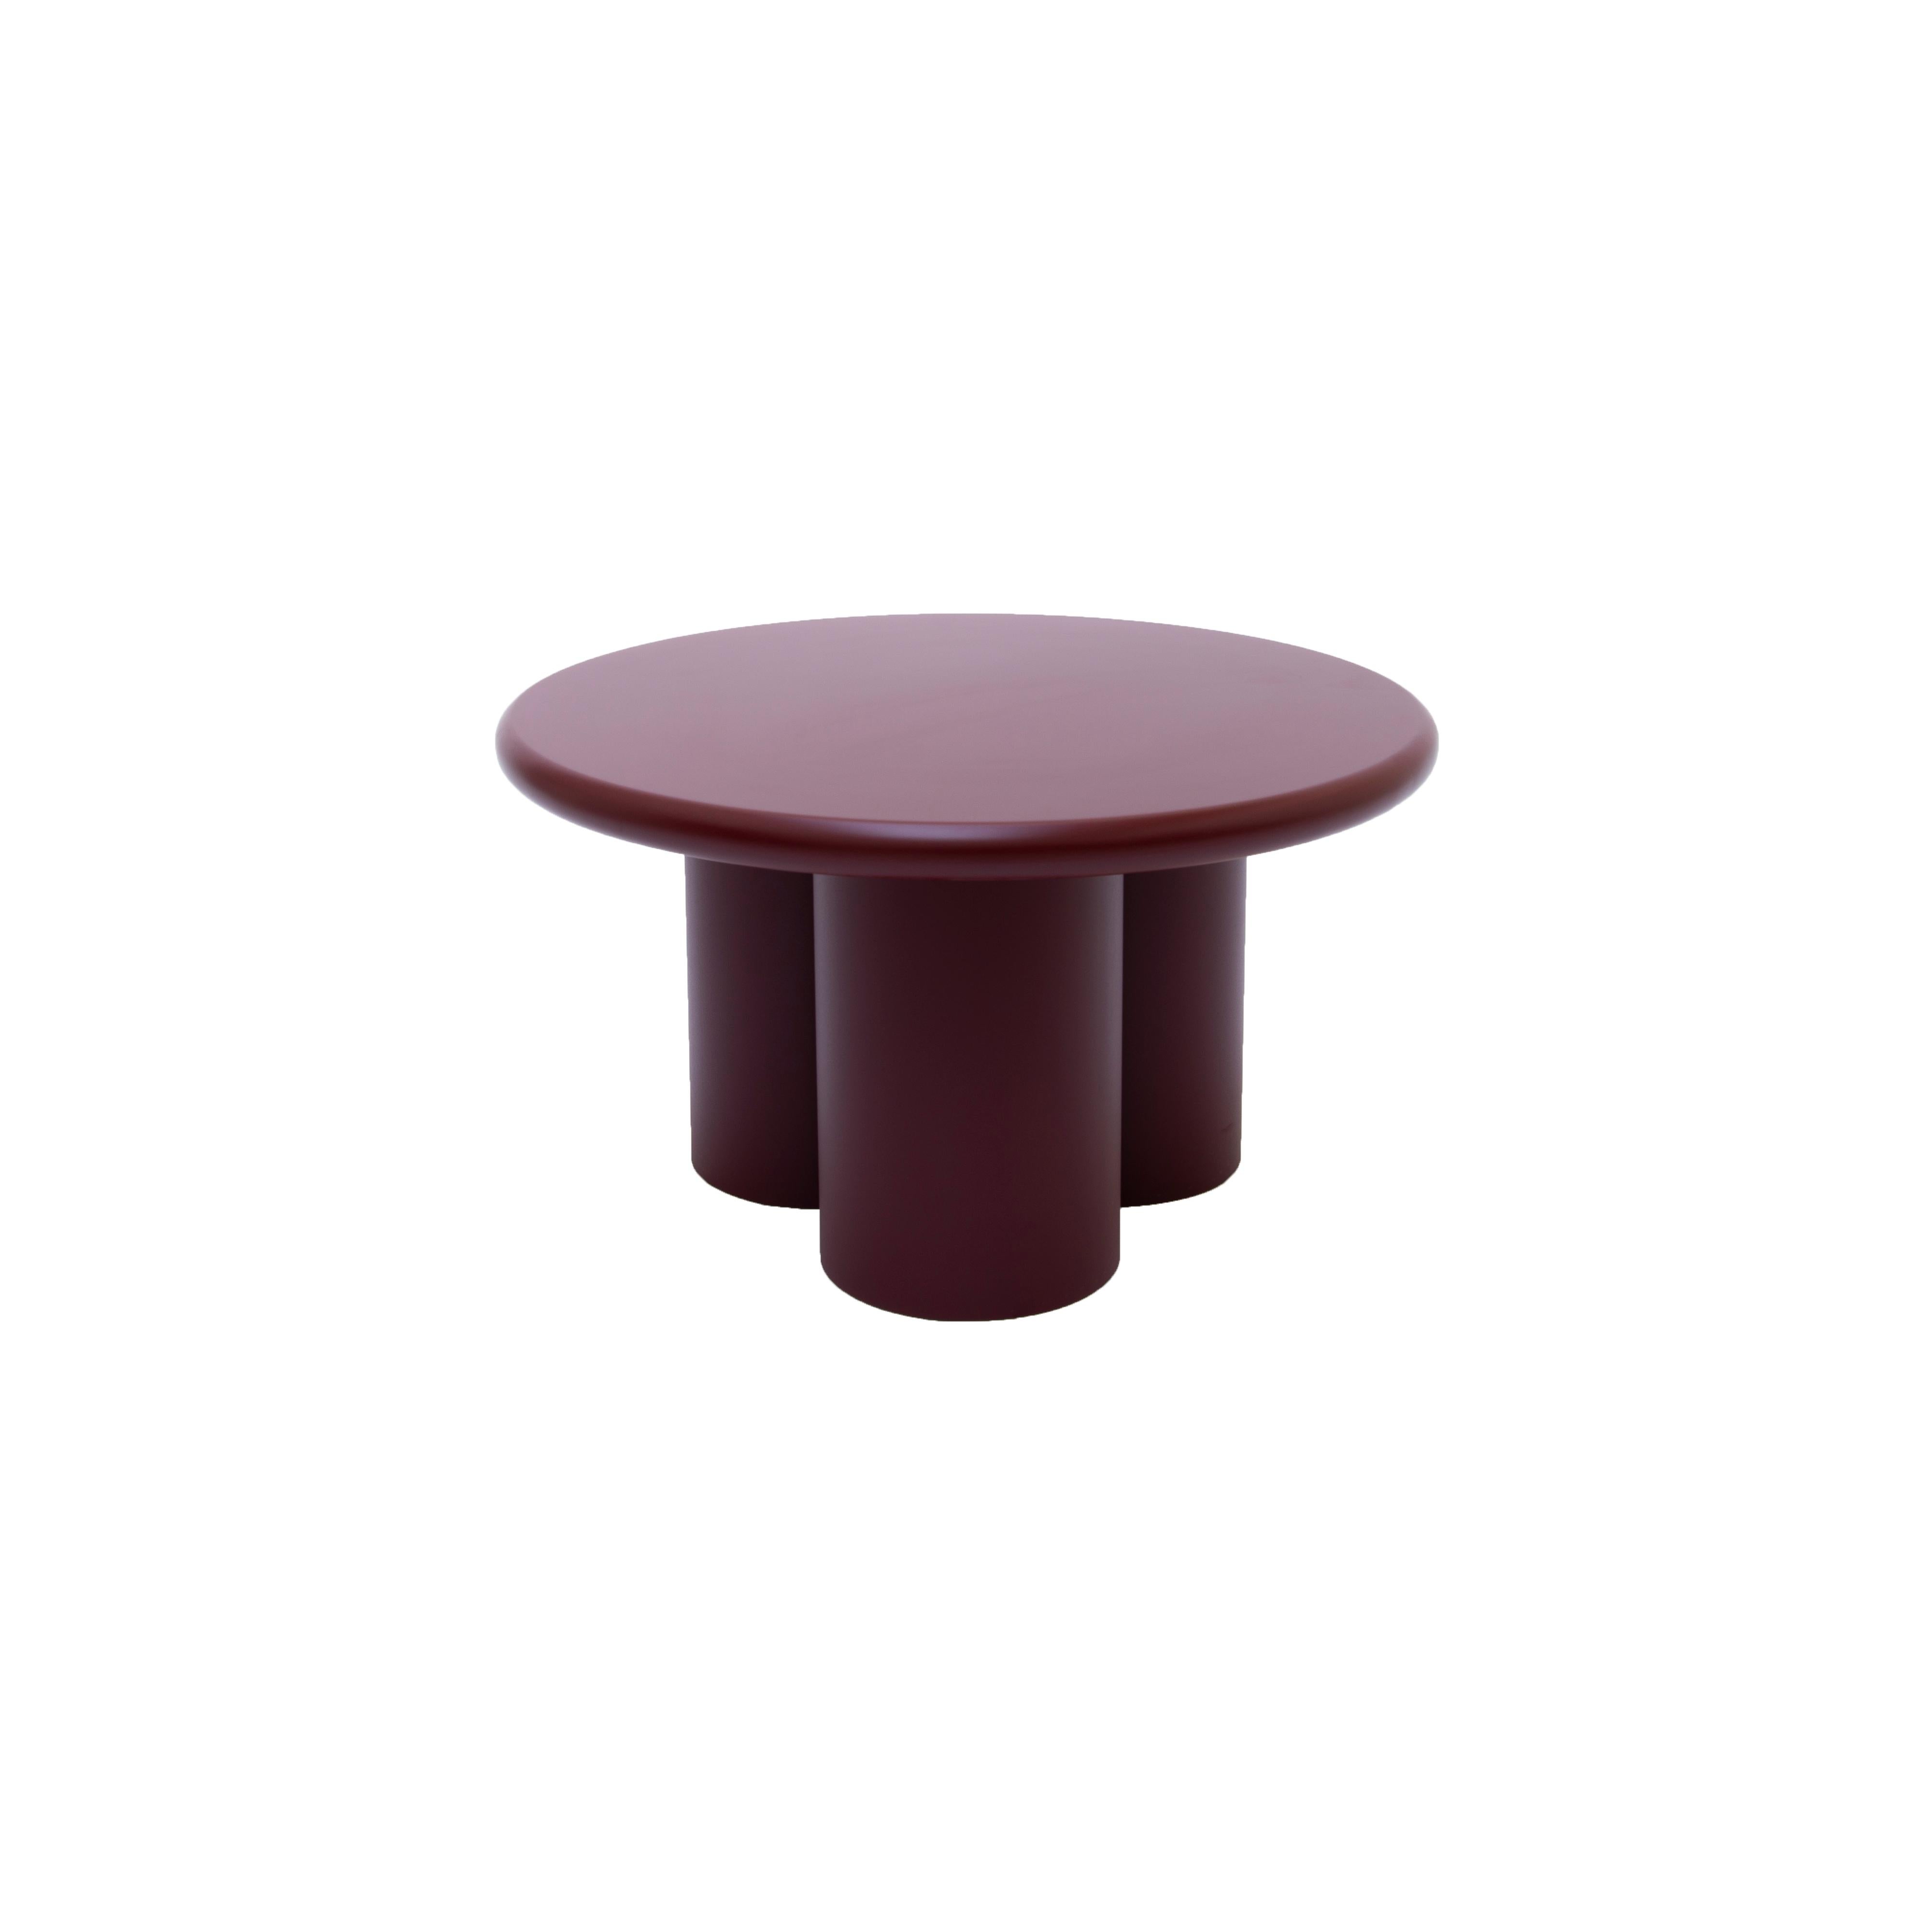 Polish Object 059 Mdf Red 90 Coffee Table by NG Design For Sale